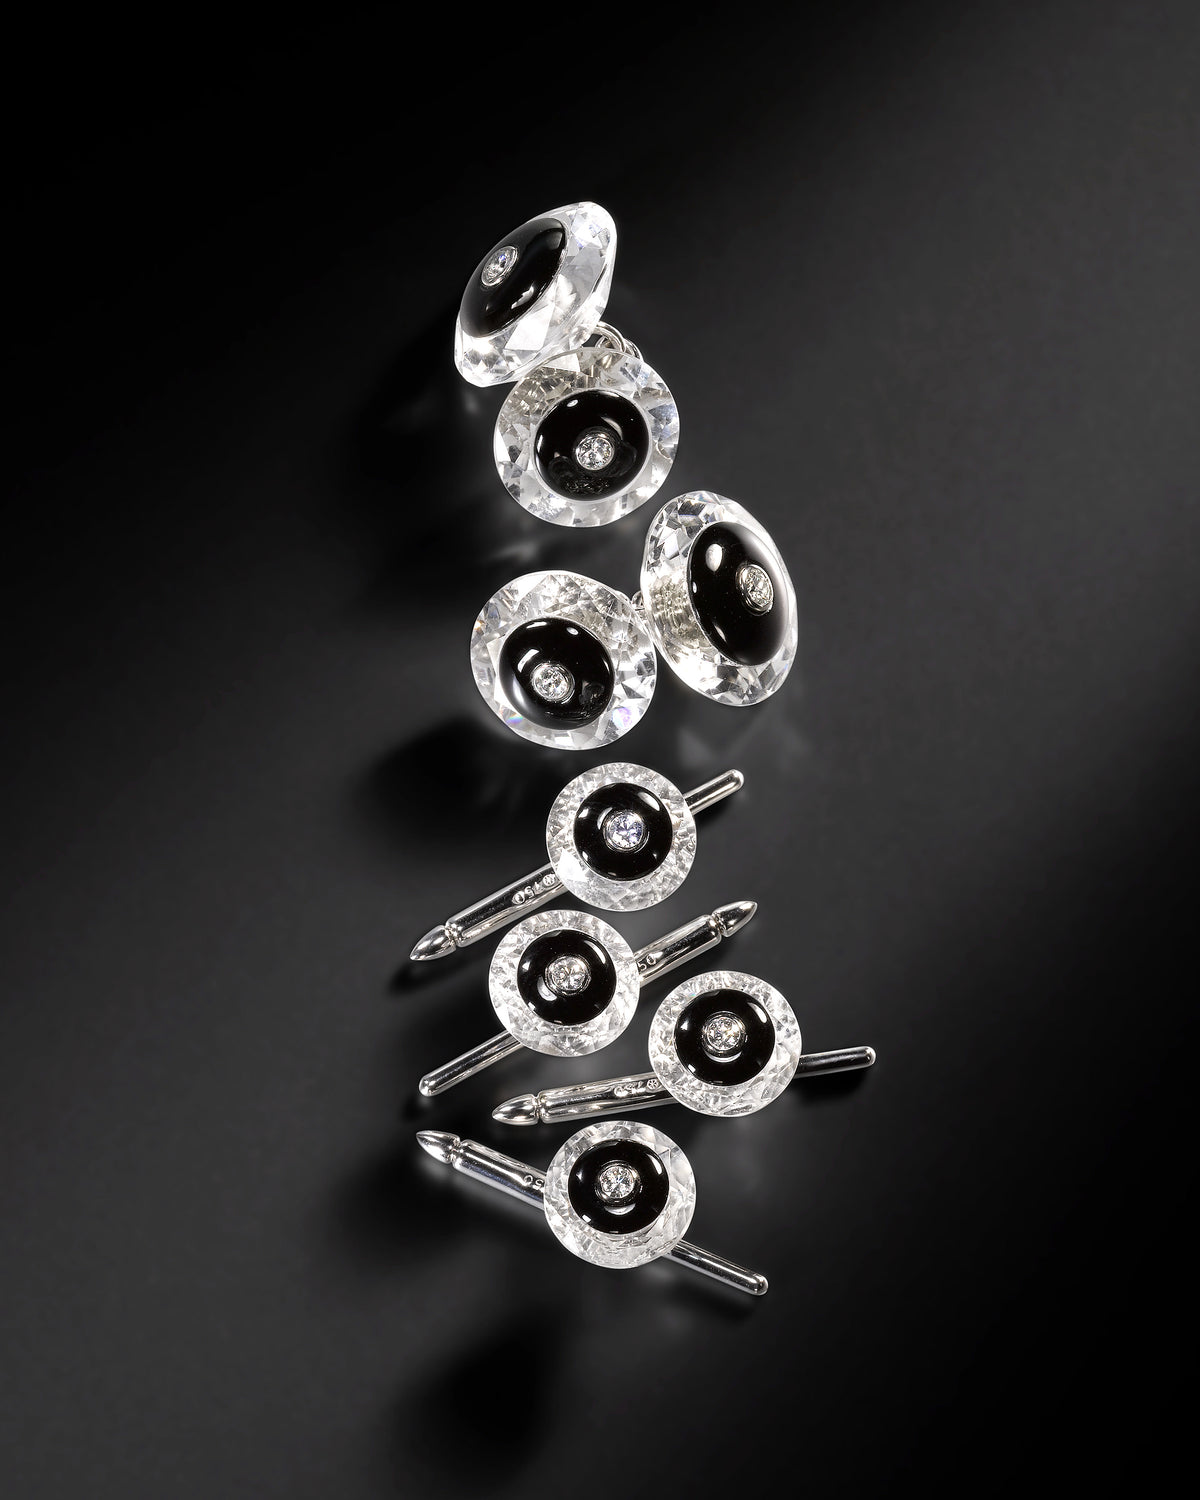 Cufflinks: A History of Style